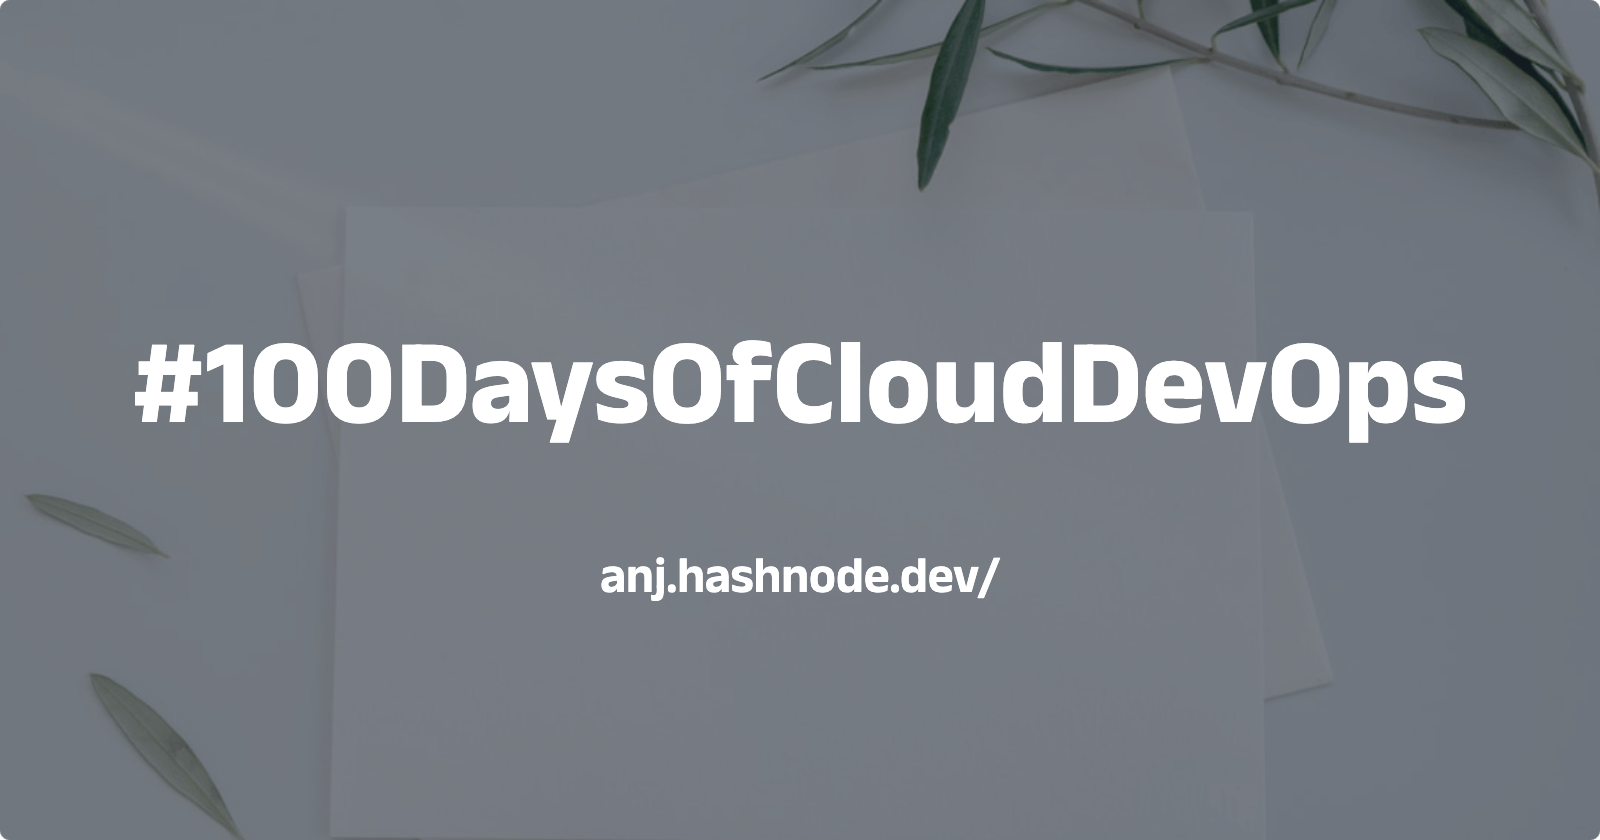 #100DaysOfCloudDevOps Challenge — Day 02 — Configuring Vagrant to use Docker as the provider for a container-based local environment